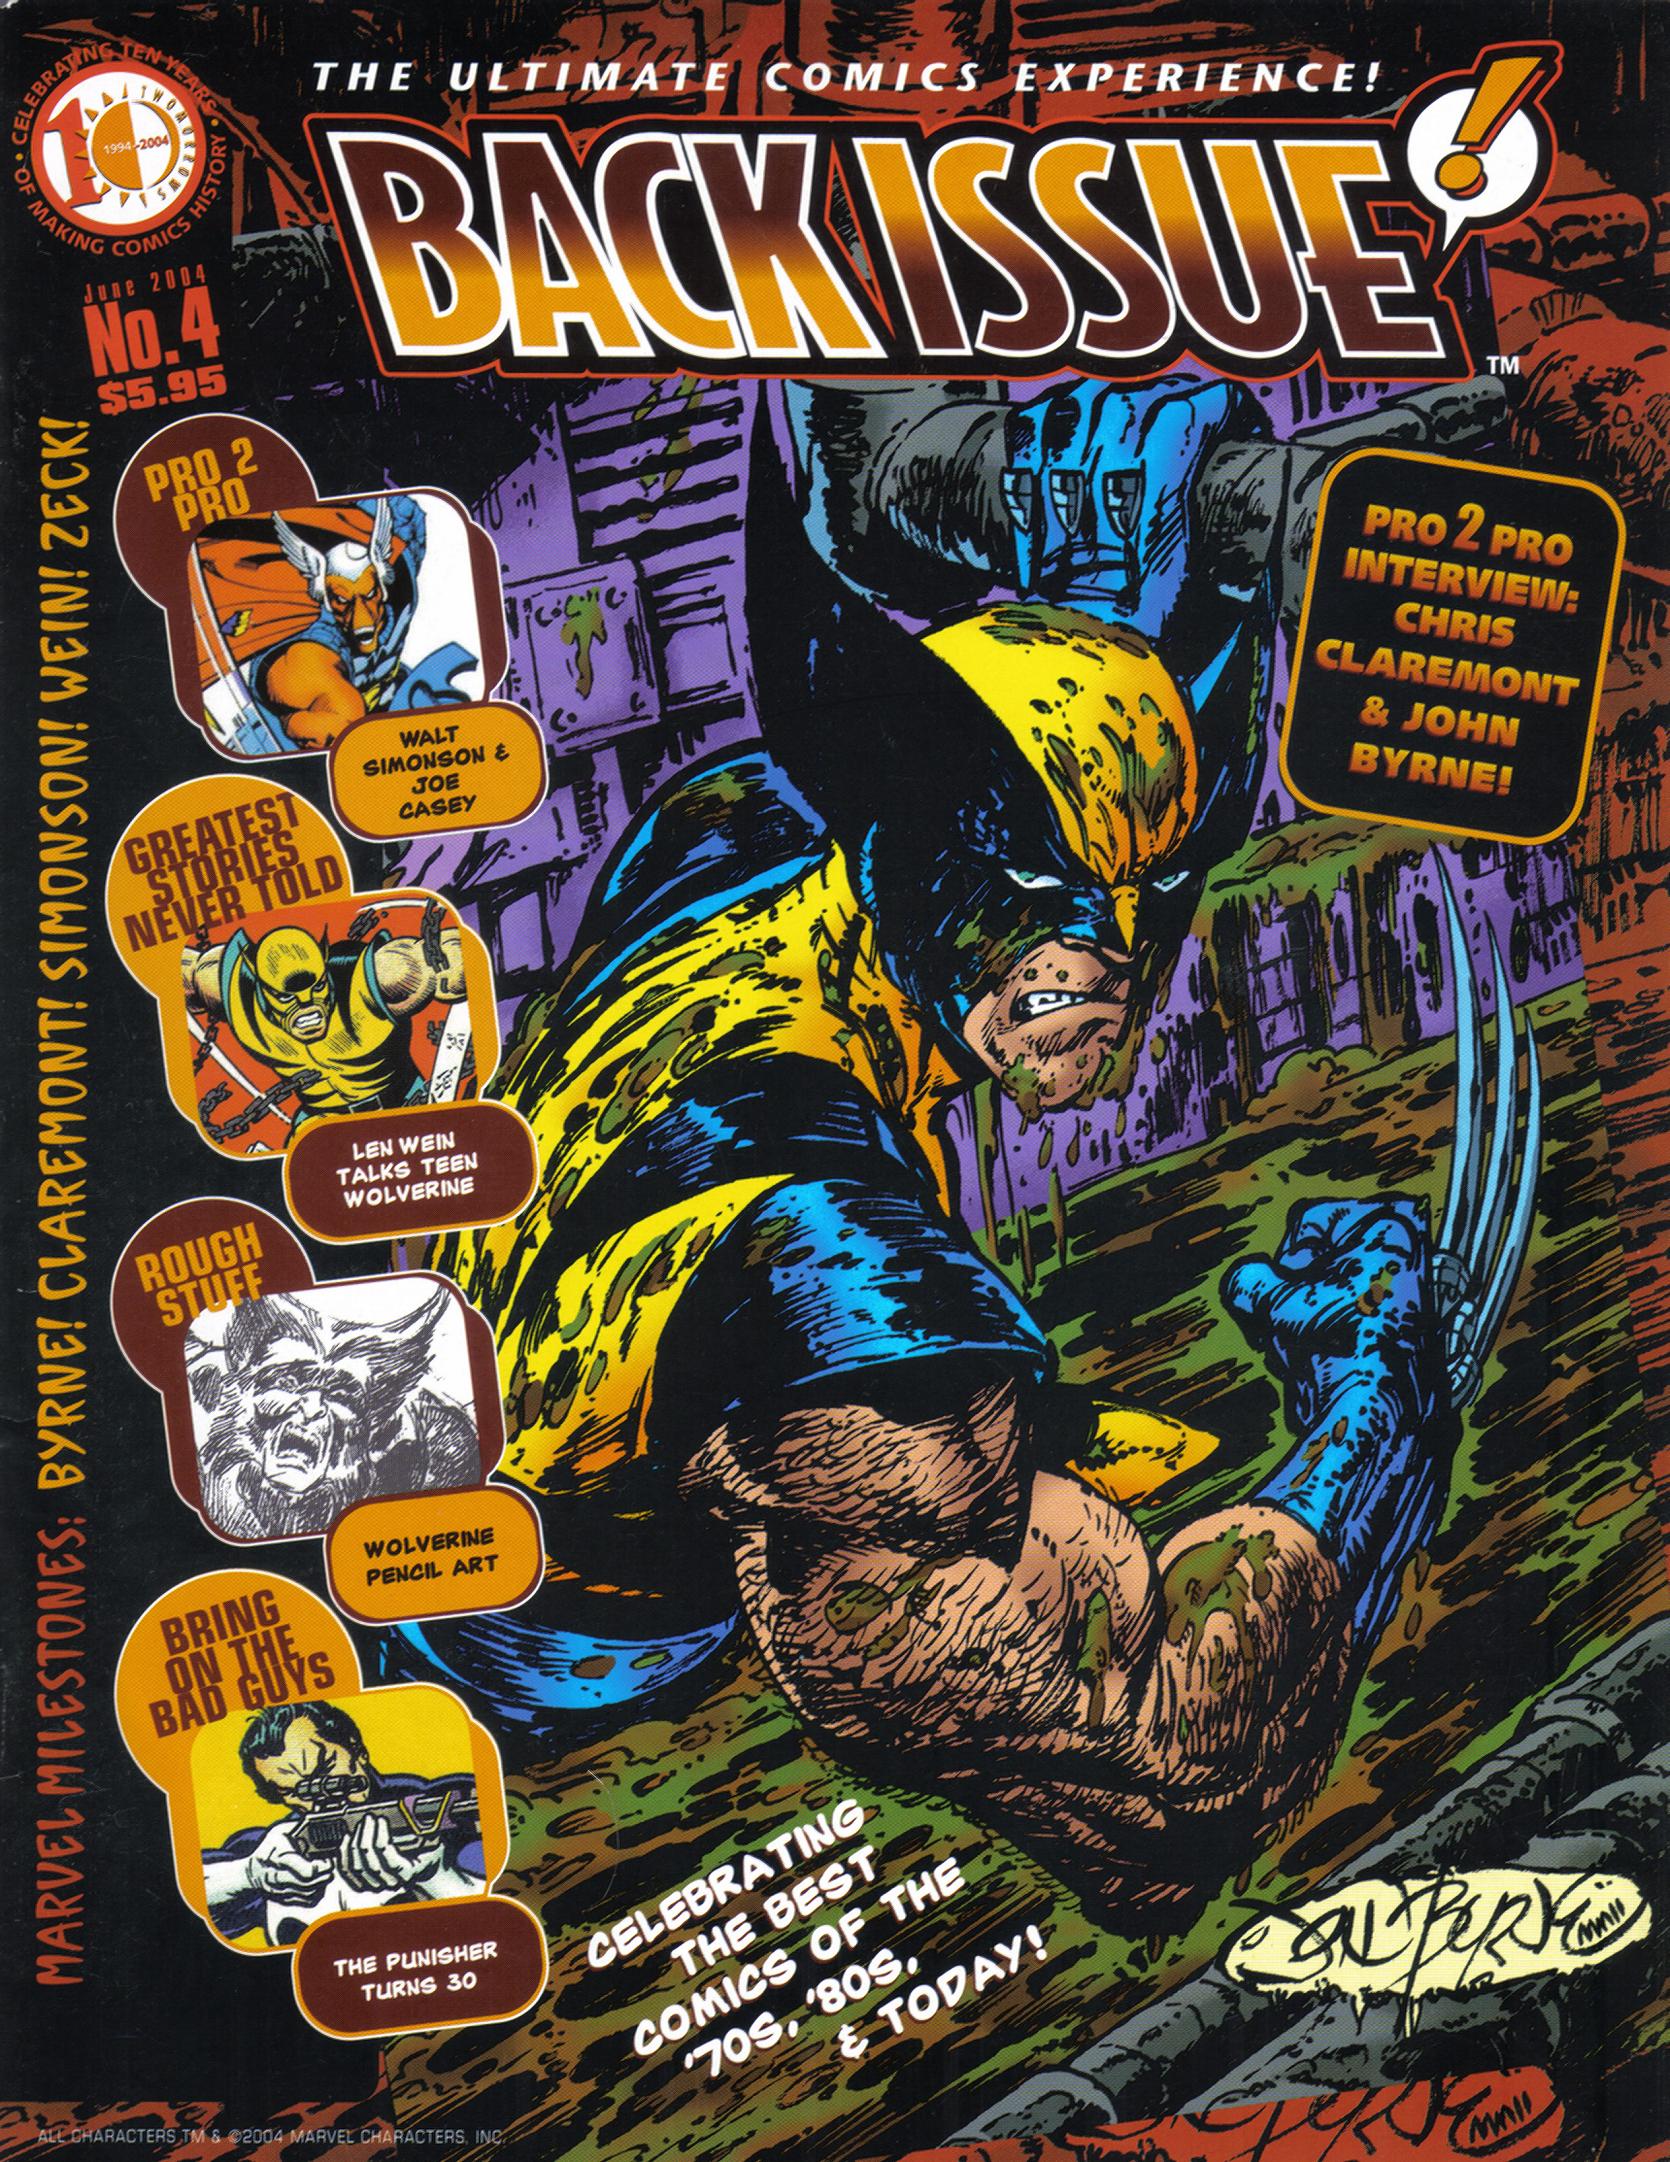 Read online Back Issue comic -  Issue #4 - 1